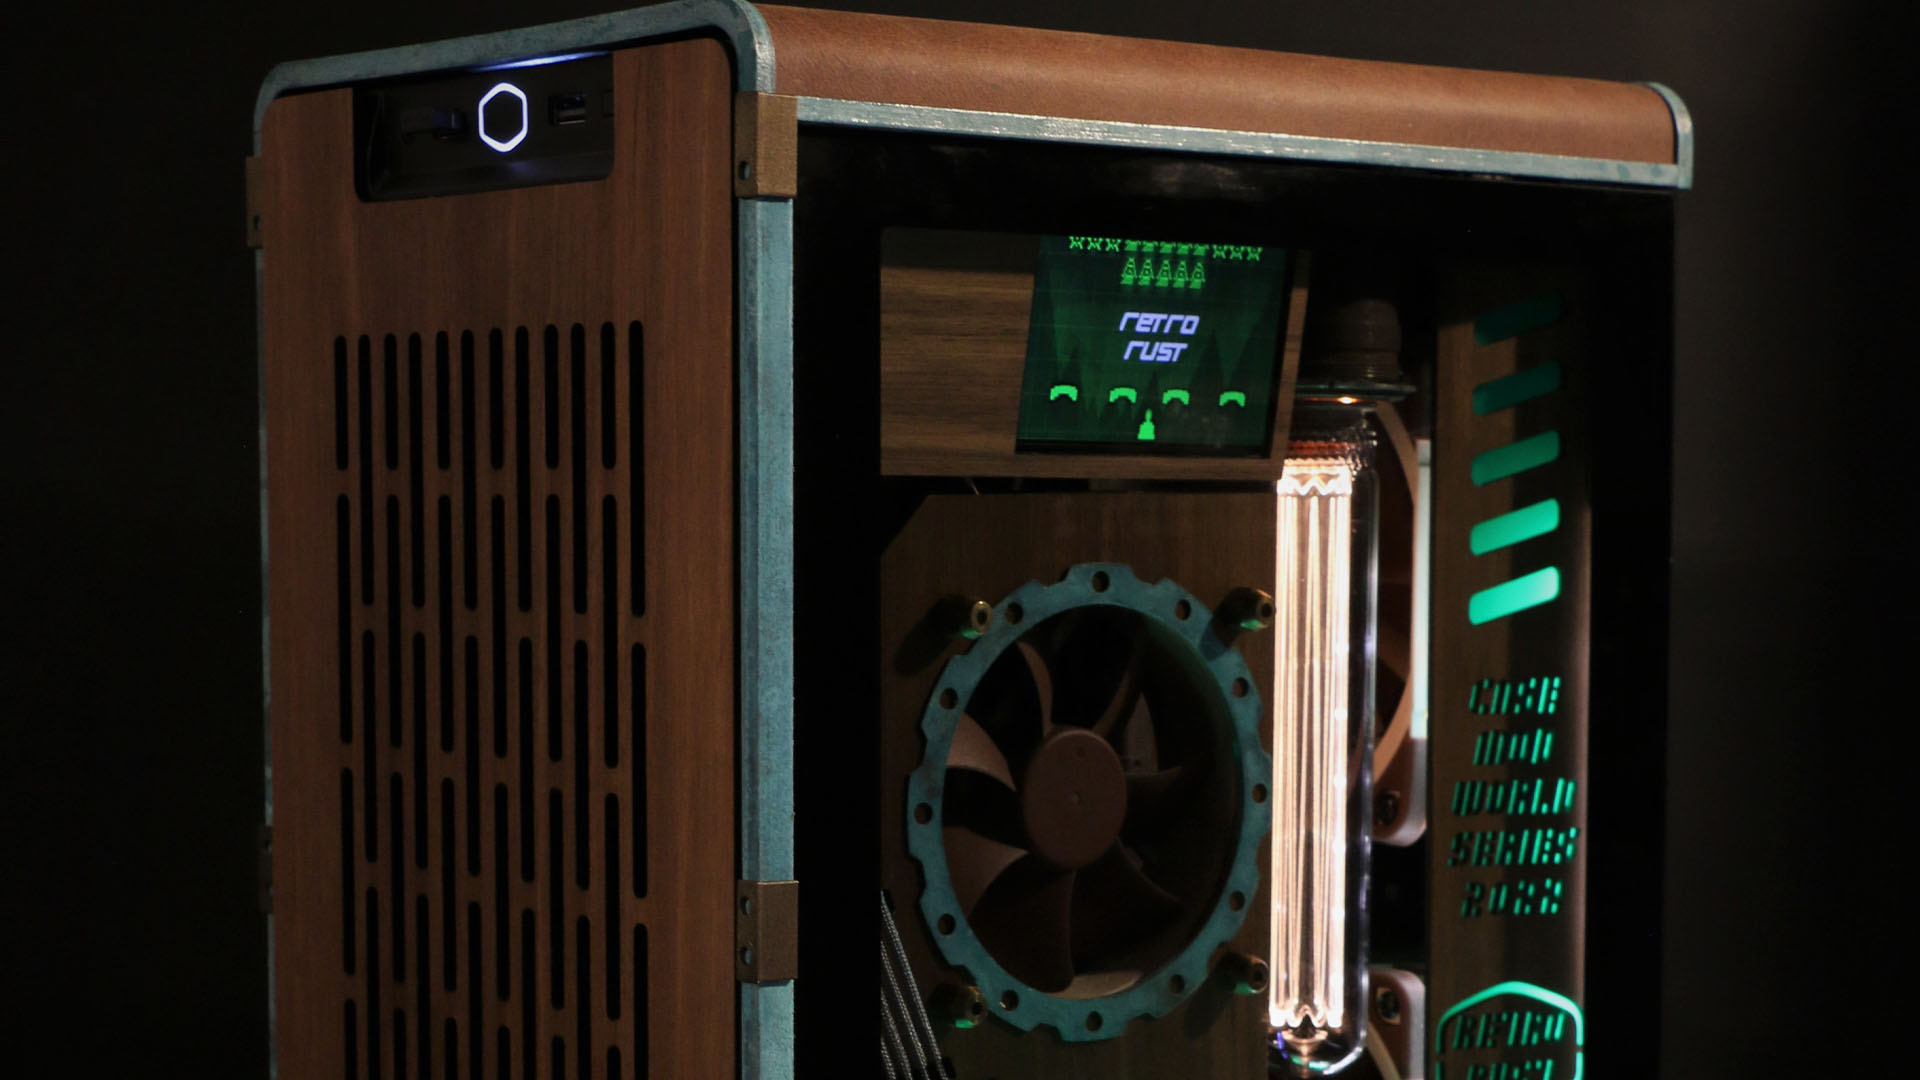 Nature meets industrial chic in this rusty steampunk PC build